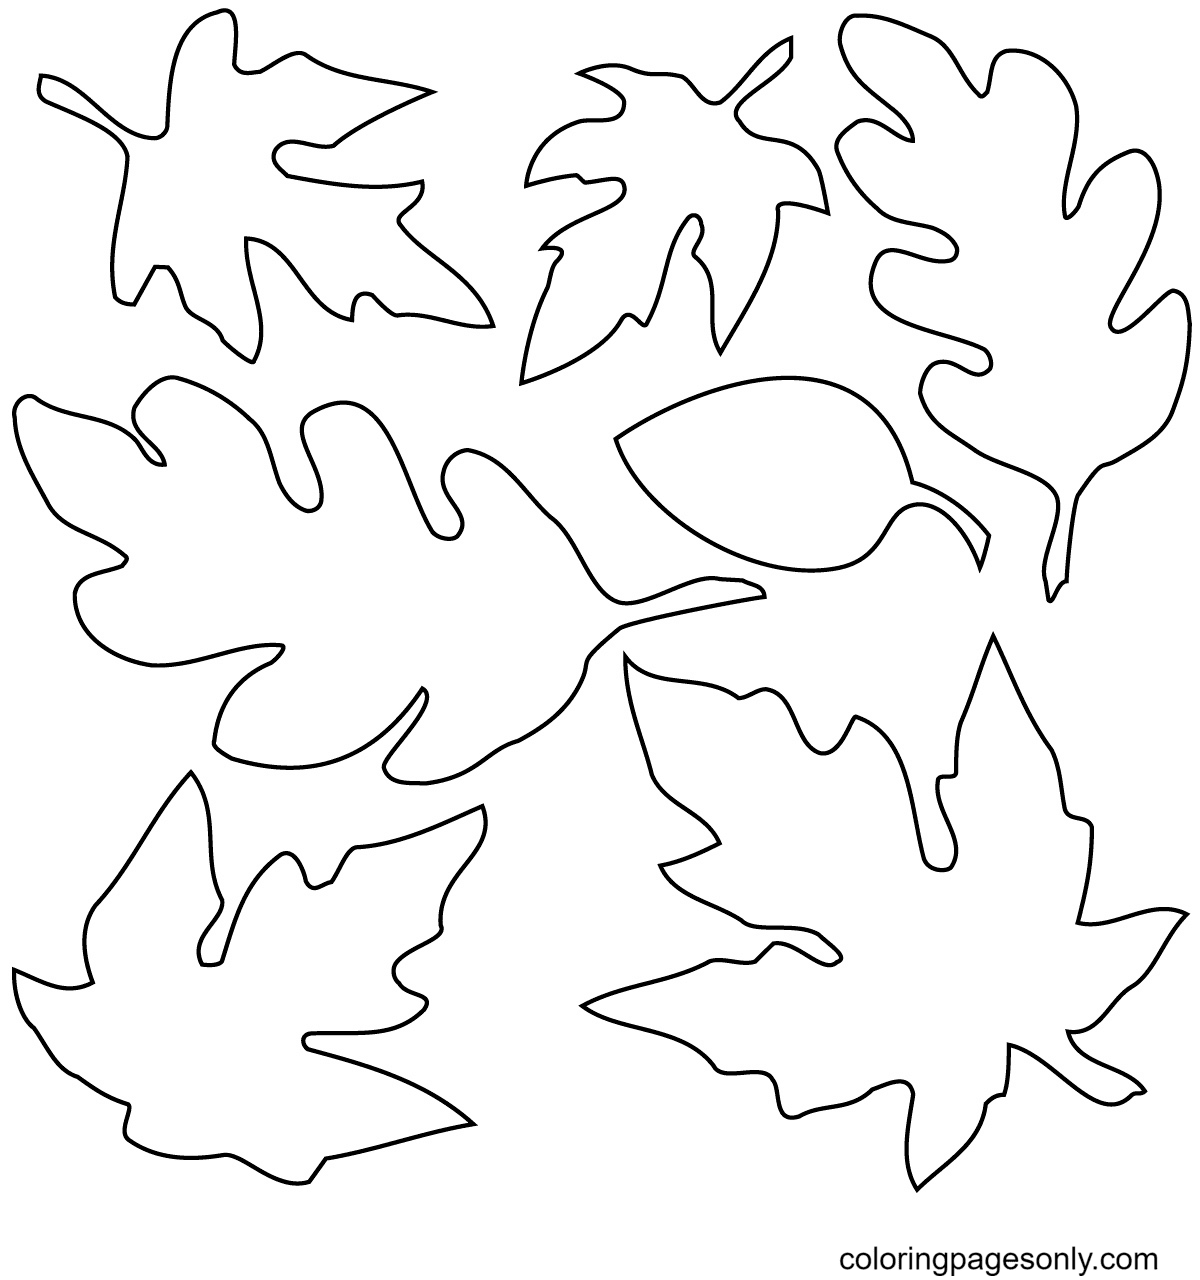 Printable Fall Leaves from Autumn Leaves